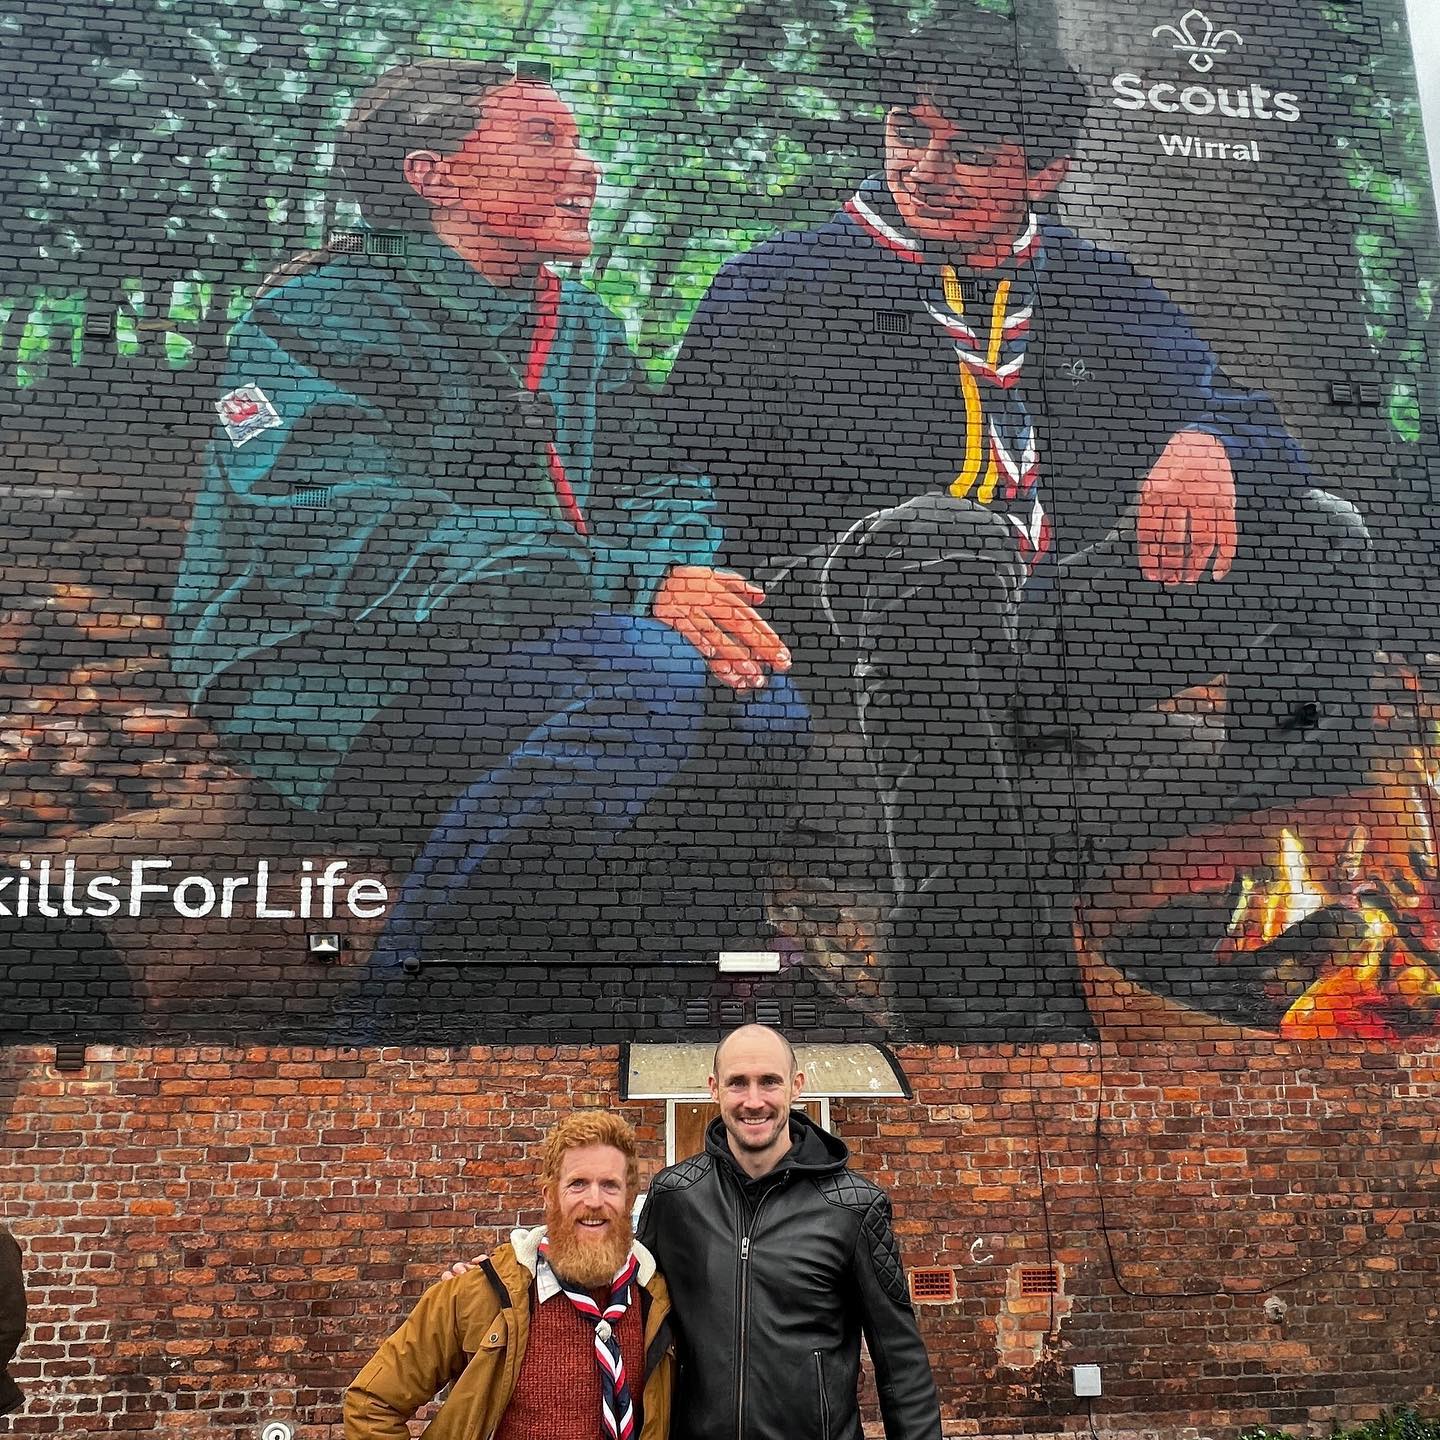 In the image, Sean Conway stands with artist Paul Curtis in front of the Wirral Scouts mural. Sean's wearing a red white and navy necker and is stood next to Paul on his right hand side. Both are smiling at the camera.